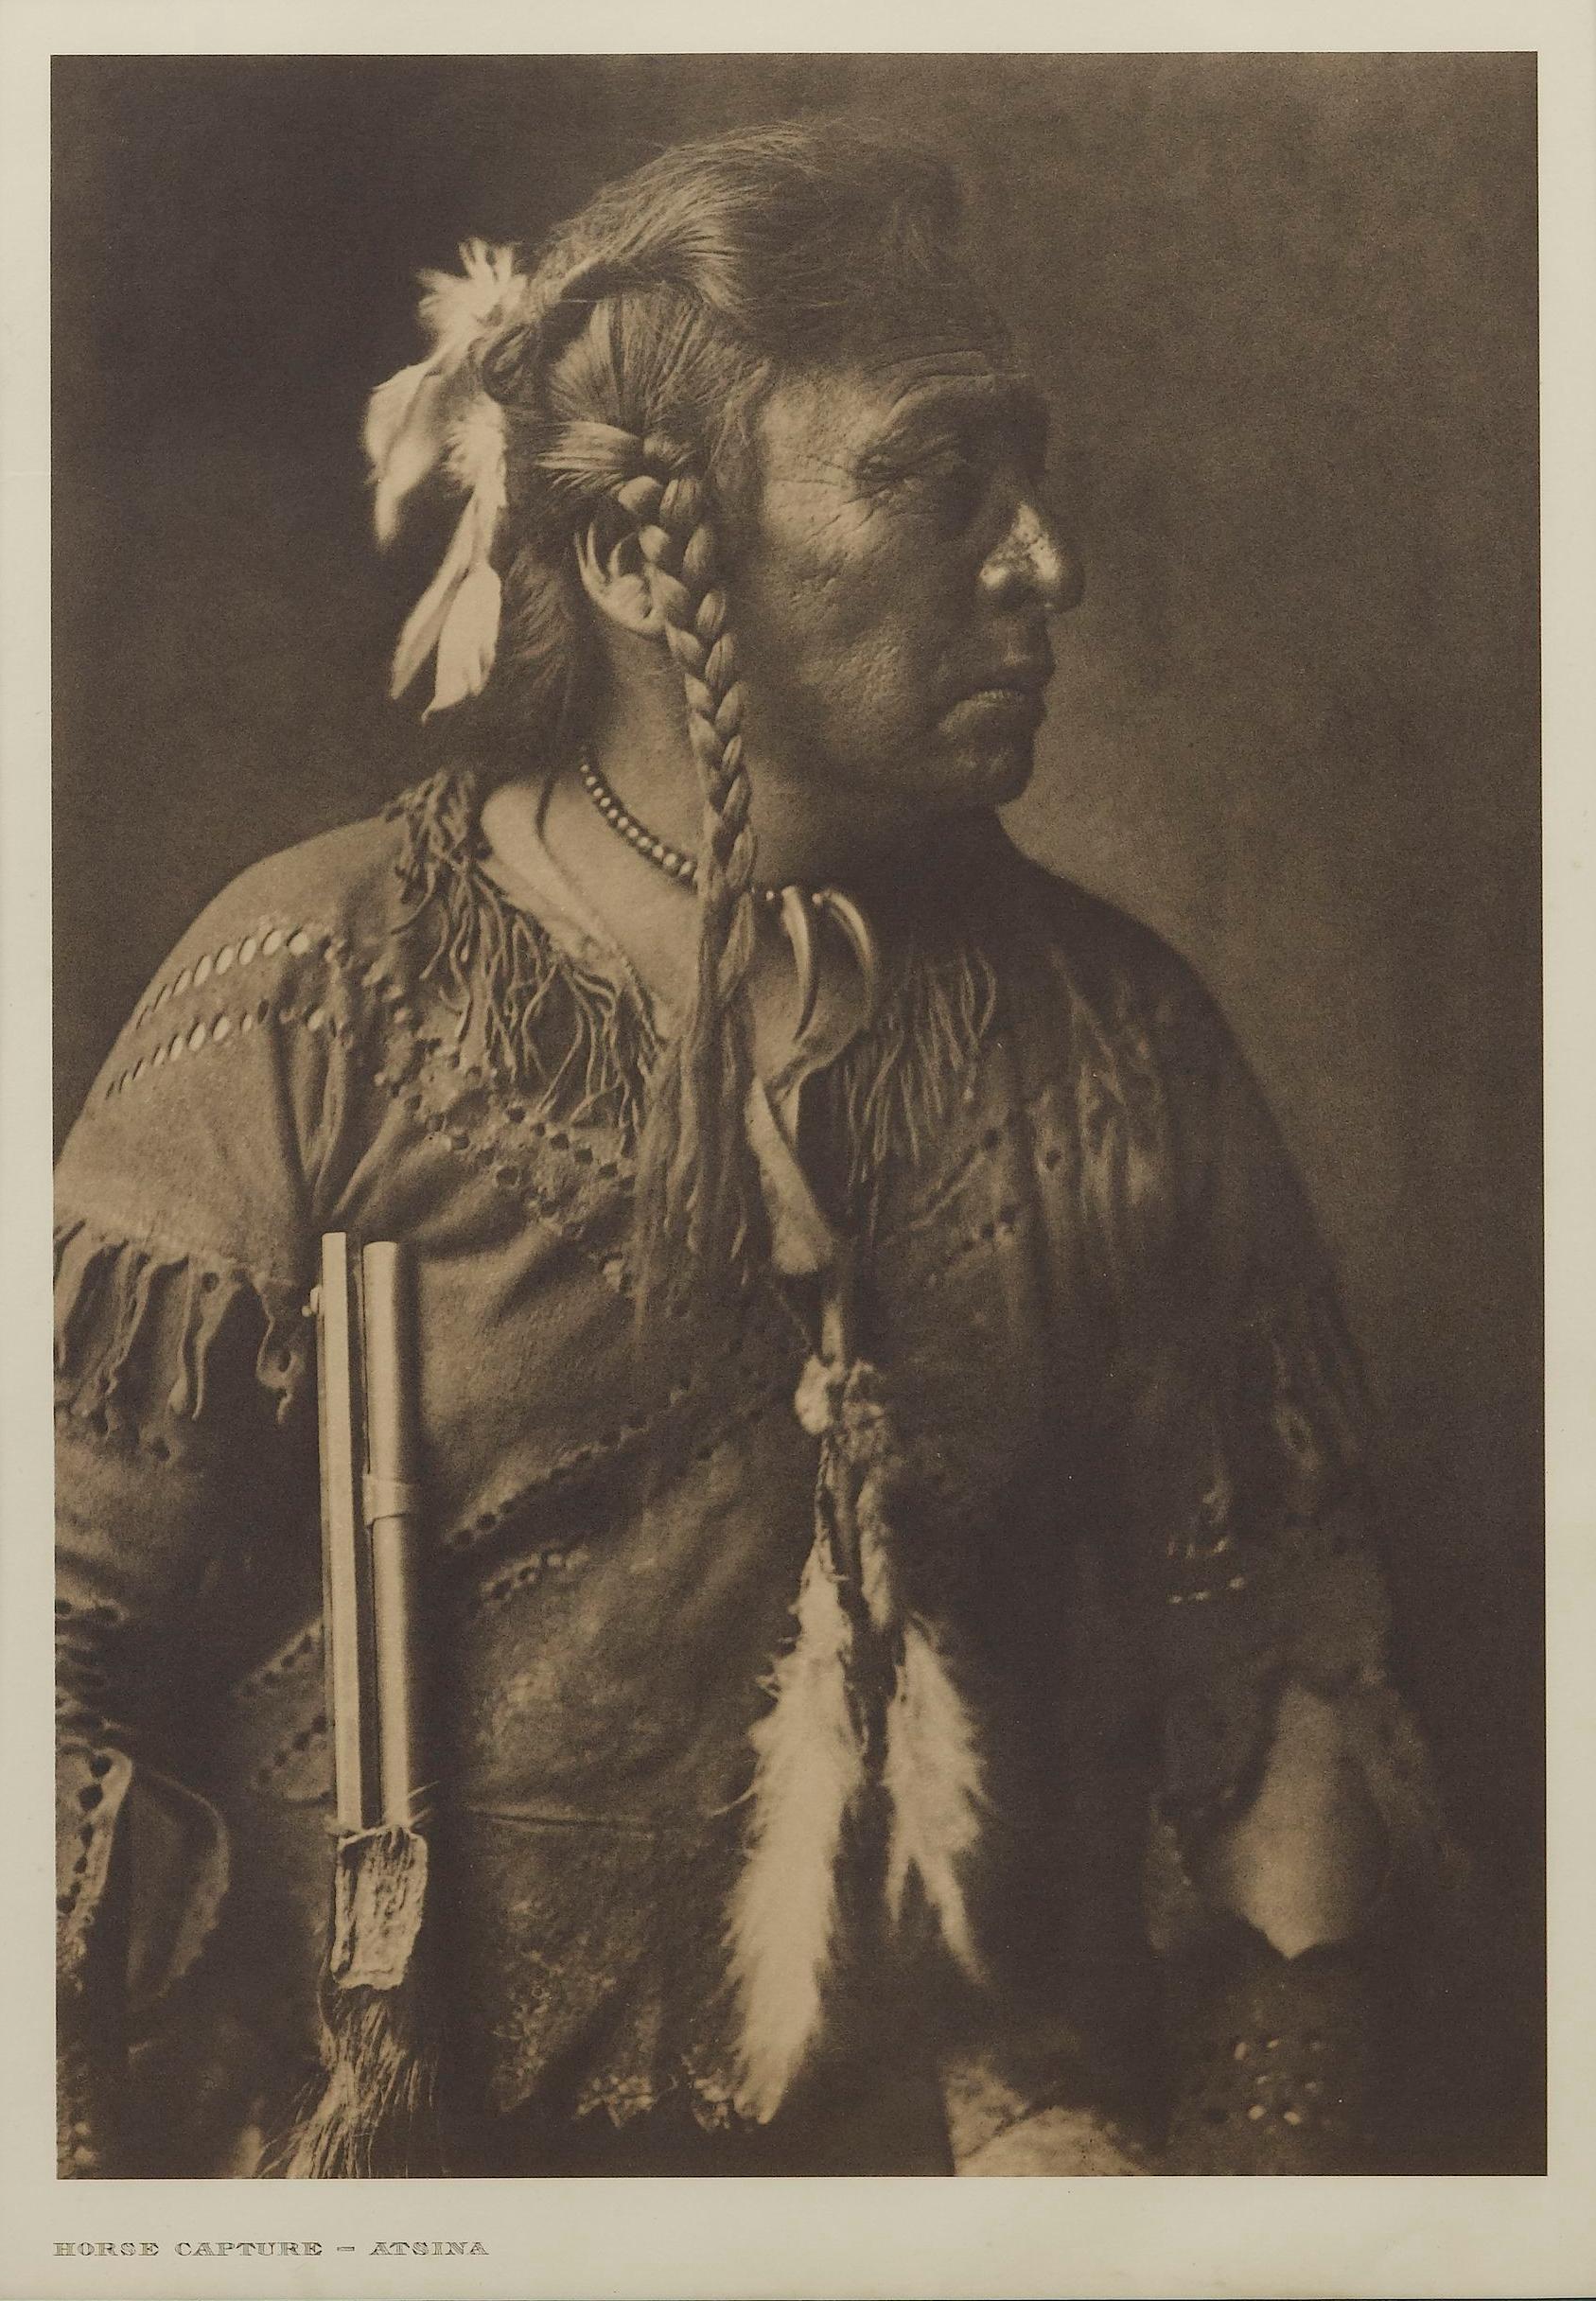 Presented is a fine photogravure portrait of an Atsina man named Horse Capture by Edward Curtis. The image is Plate 170 from Supplementary Portfolio 5 of Edward Curtis' epic project The North American Indian. The photogravure was published in 1908